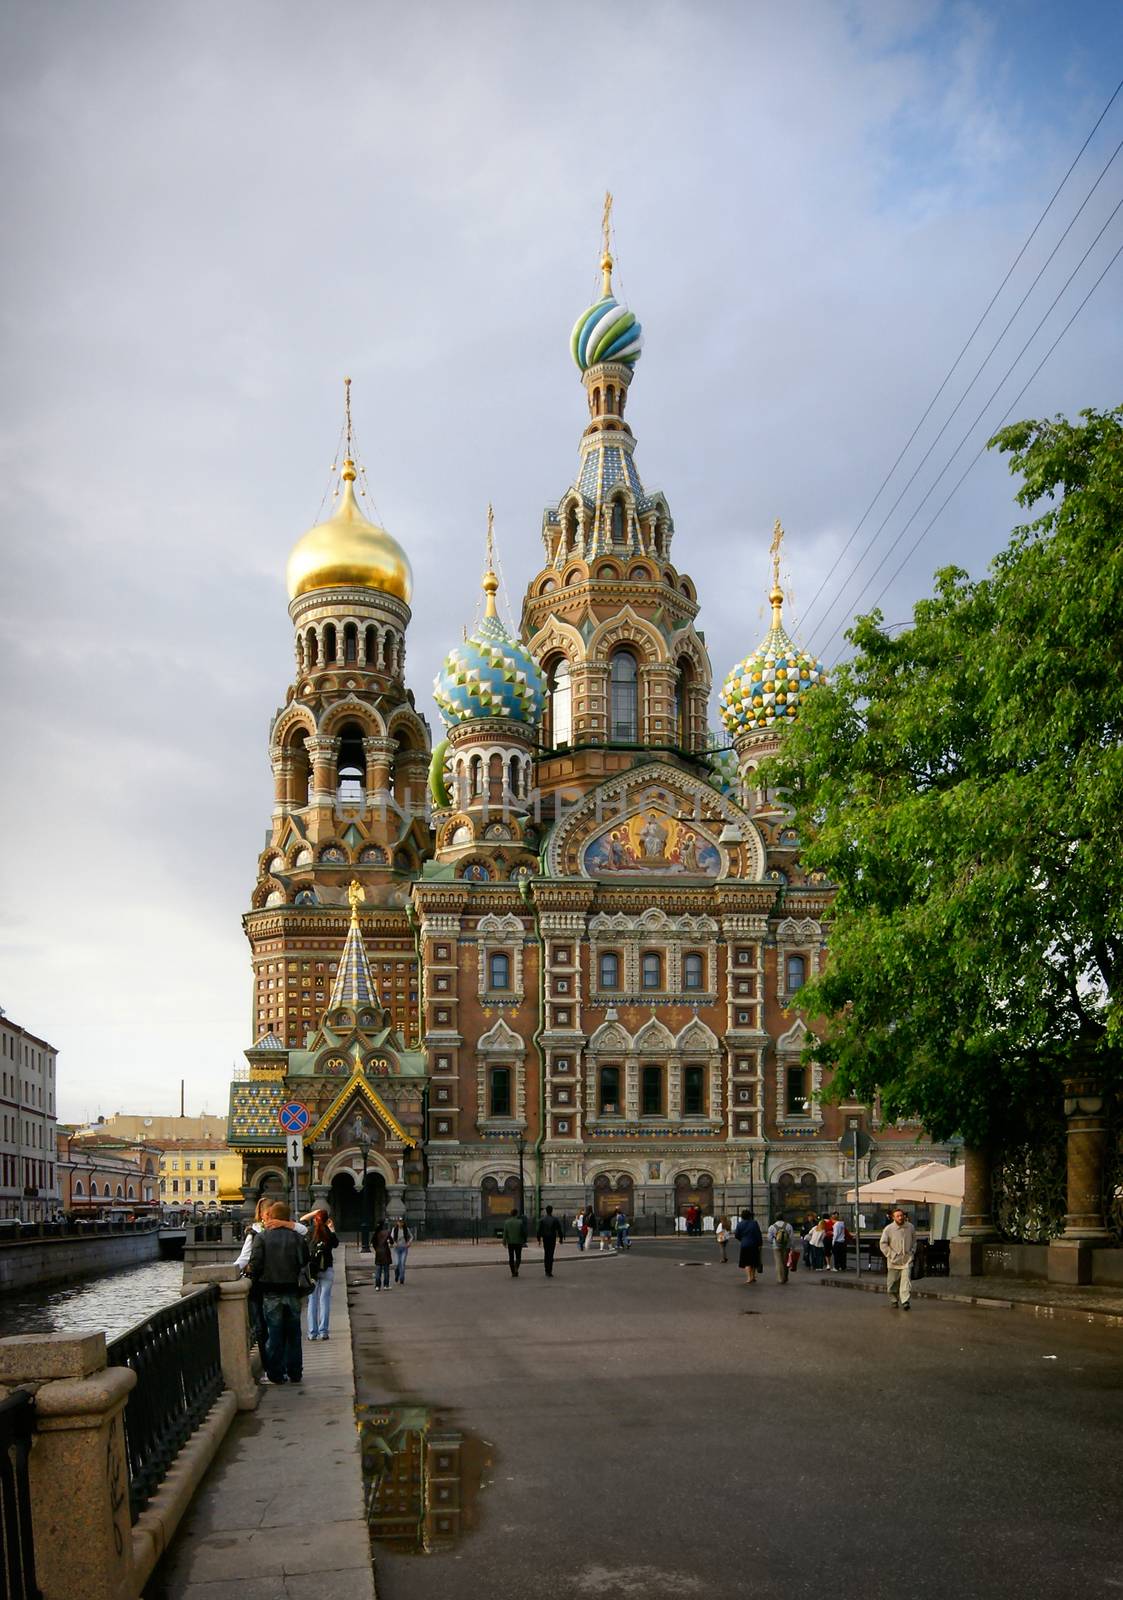 St. Petersburg, Church of the Savior on spilled blood by mowgli